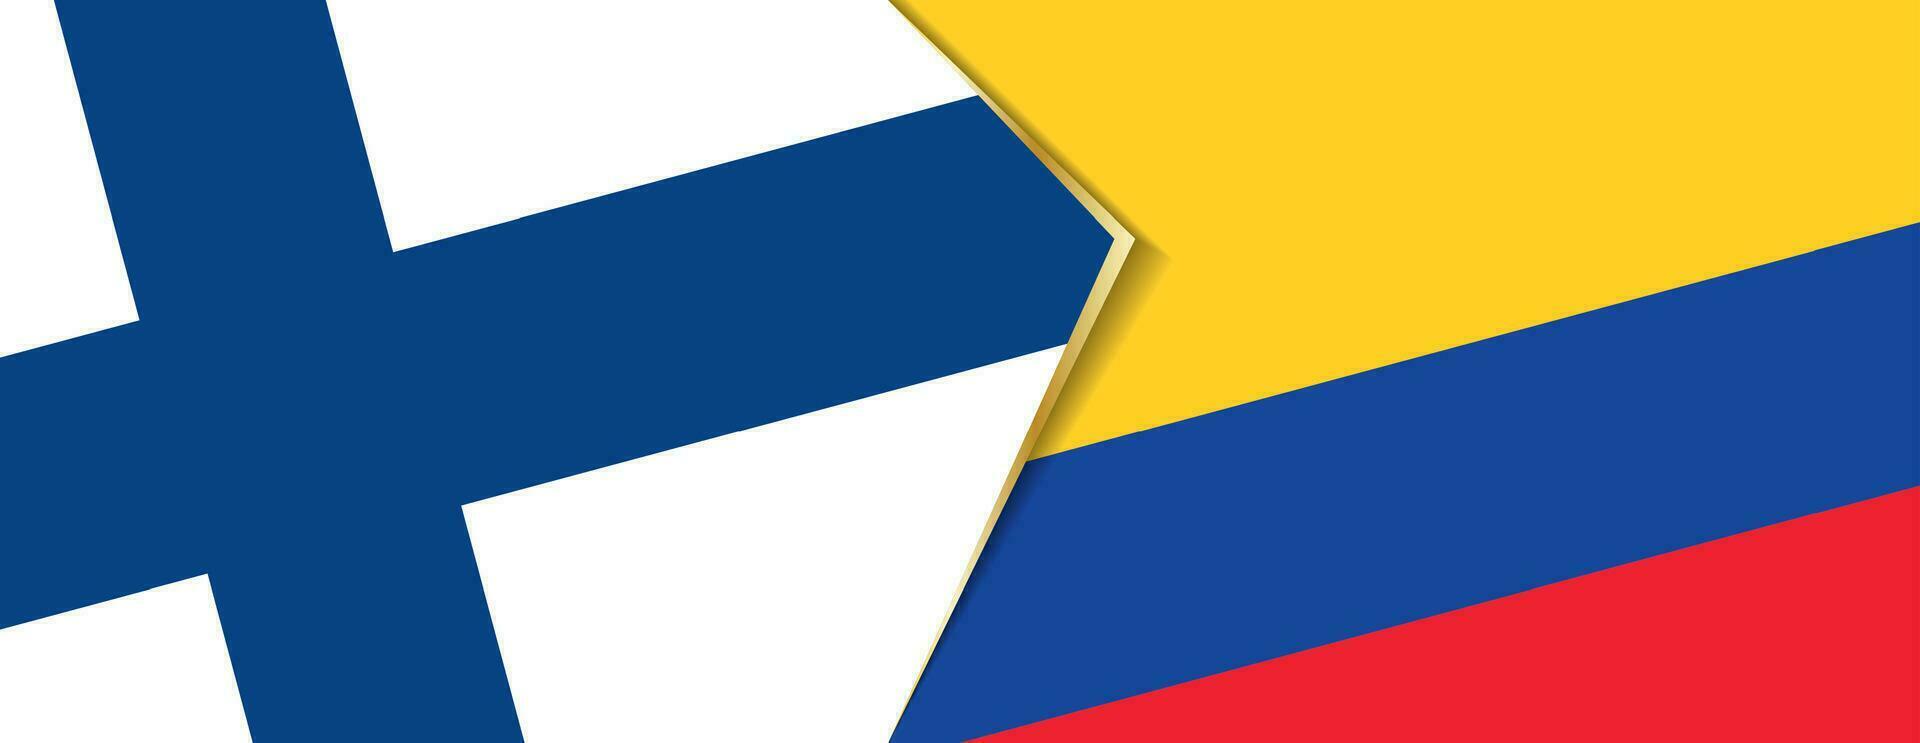 Finland and Colombia flags, two vector flags.